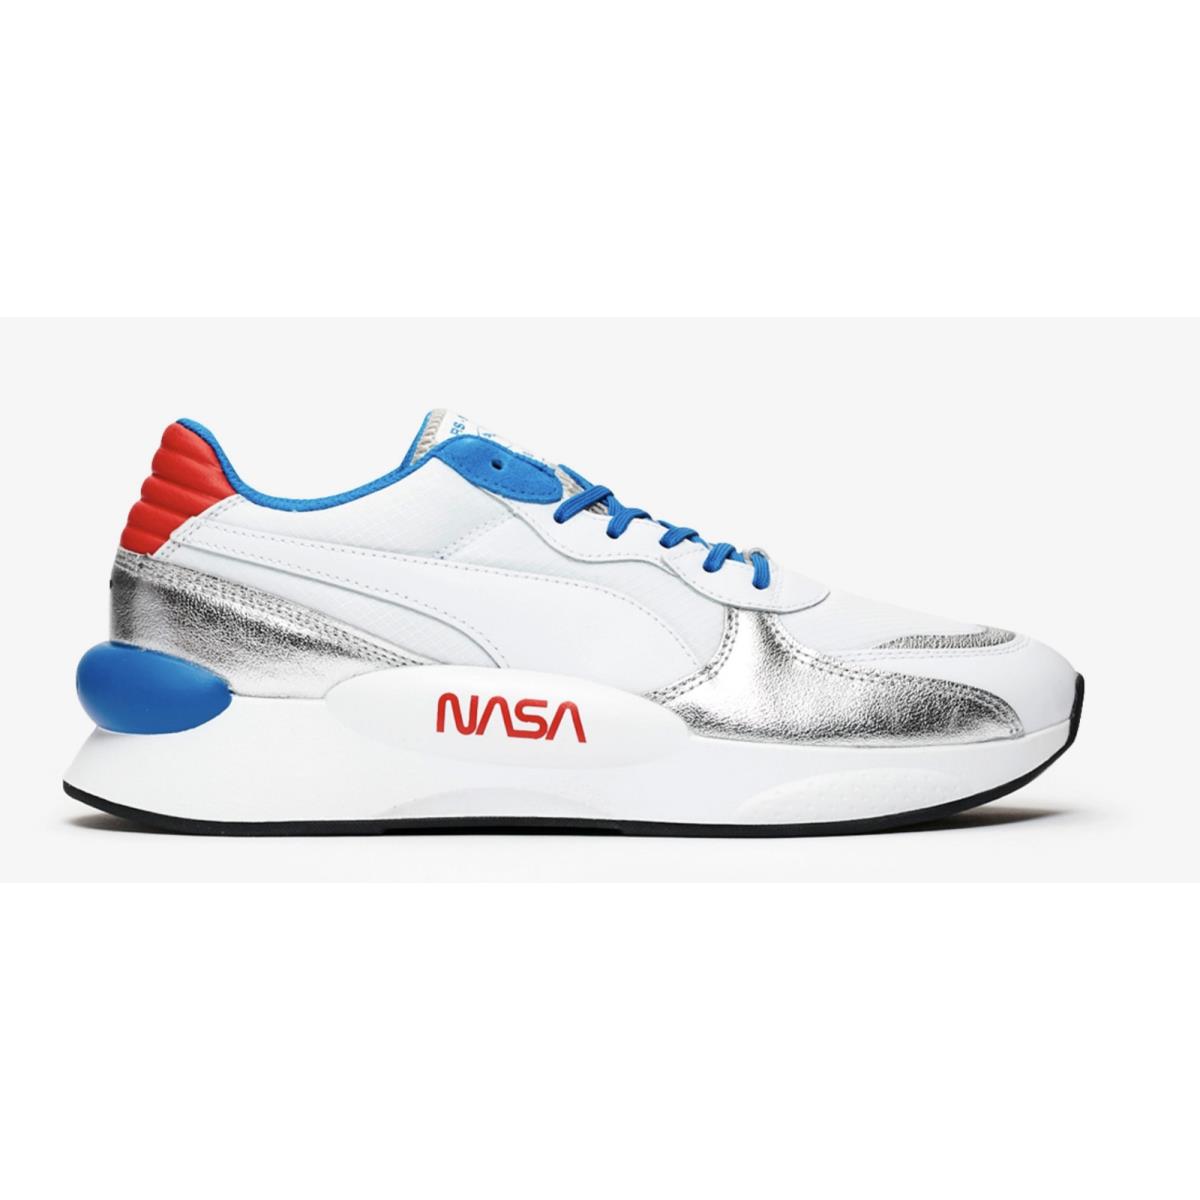 luister vacature Fractie Puma RS 9.8 Space Agency Nasa 372509-01 Puma White/puma Silver Shoes s1 |  036486807826 - Puma shoes - White | SporTipTop